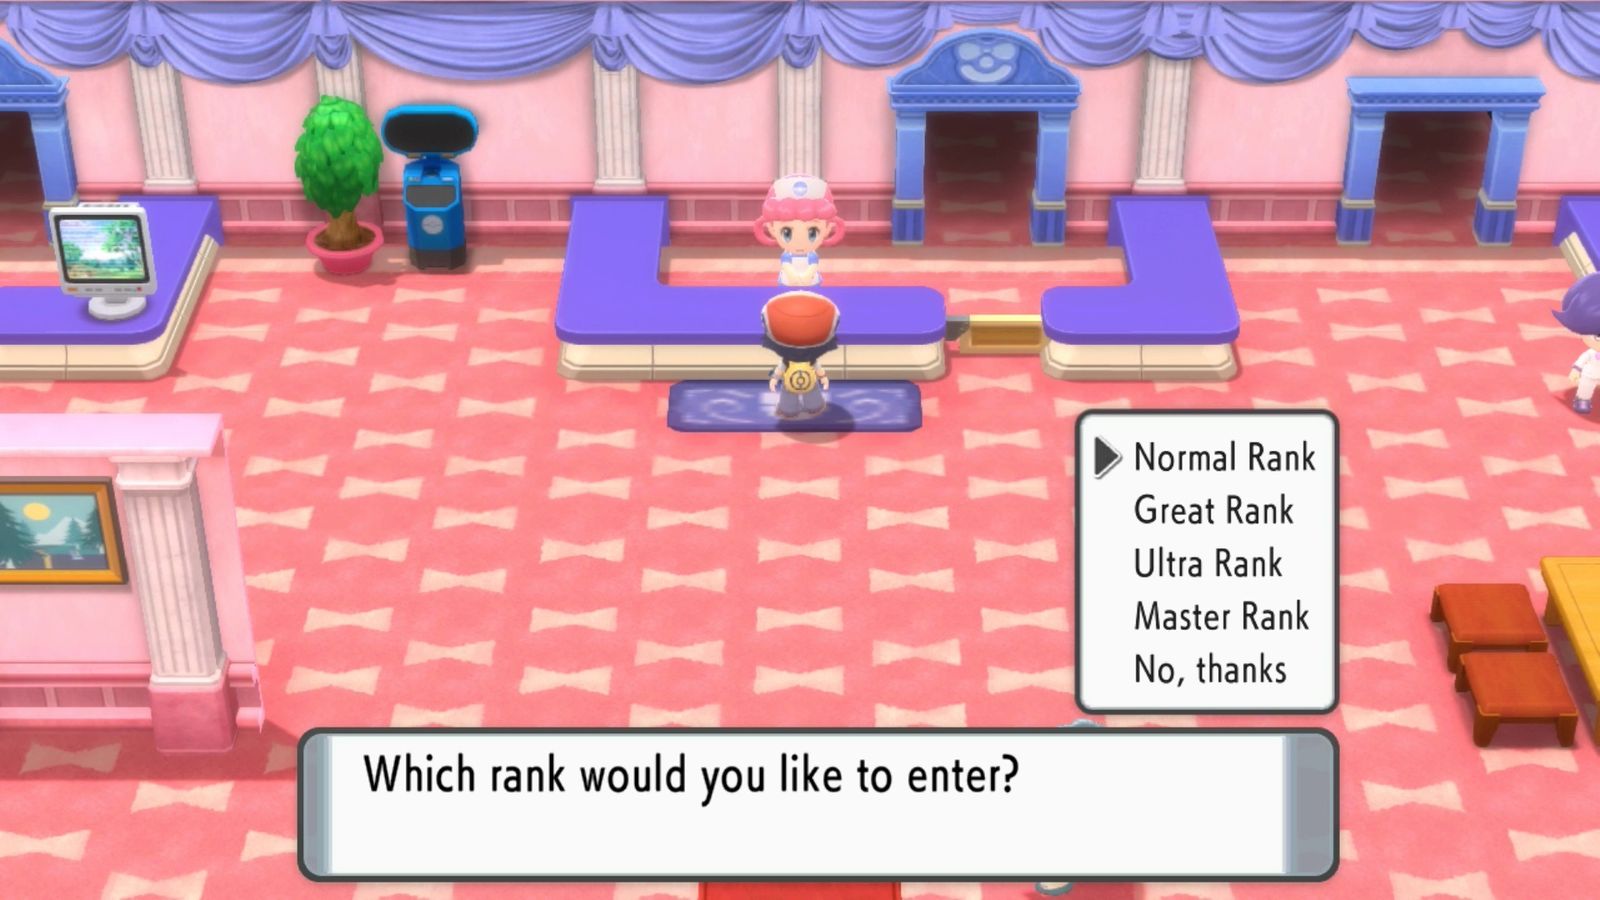 A Pokémon Trainer choosing which rank to take part in for the Super Contest Show in Hearthome City in Pokémon Brilliant Diamond and Shining Pearl.